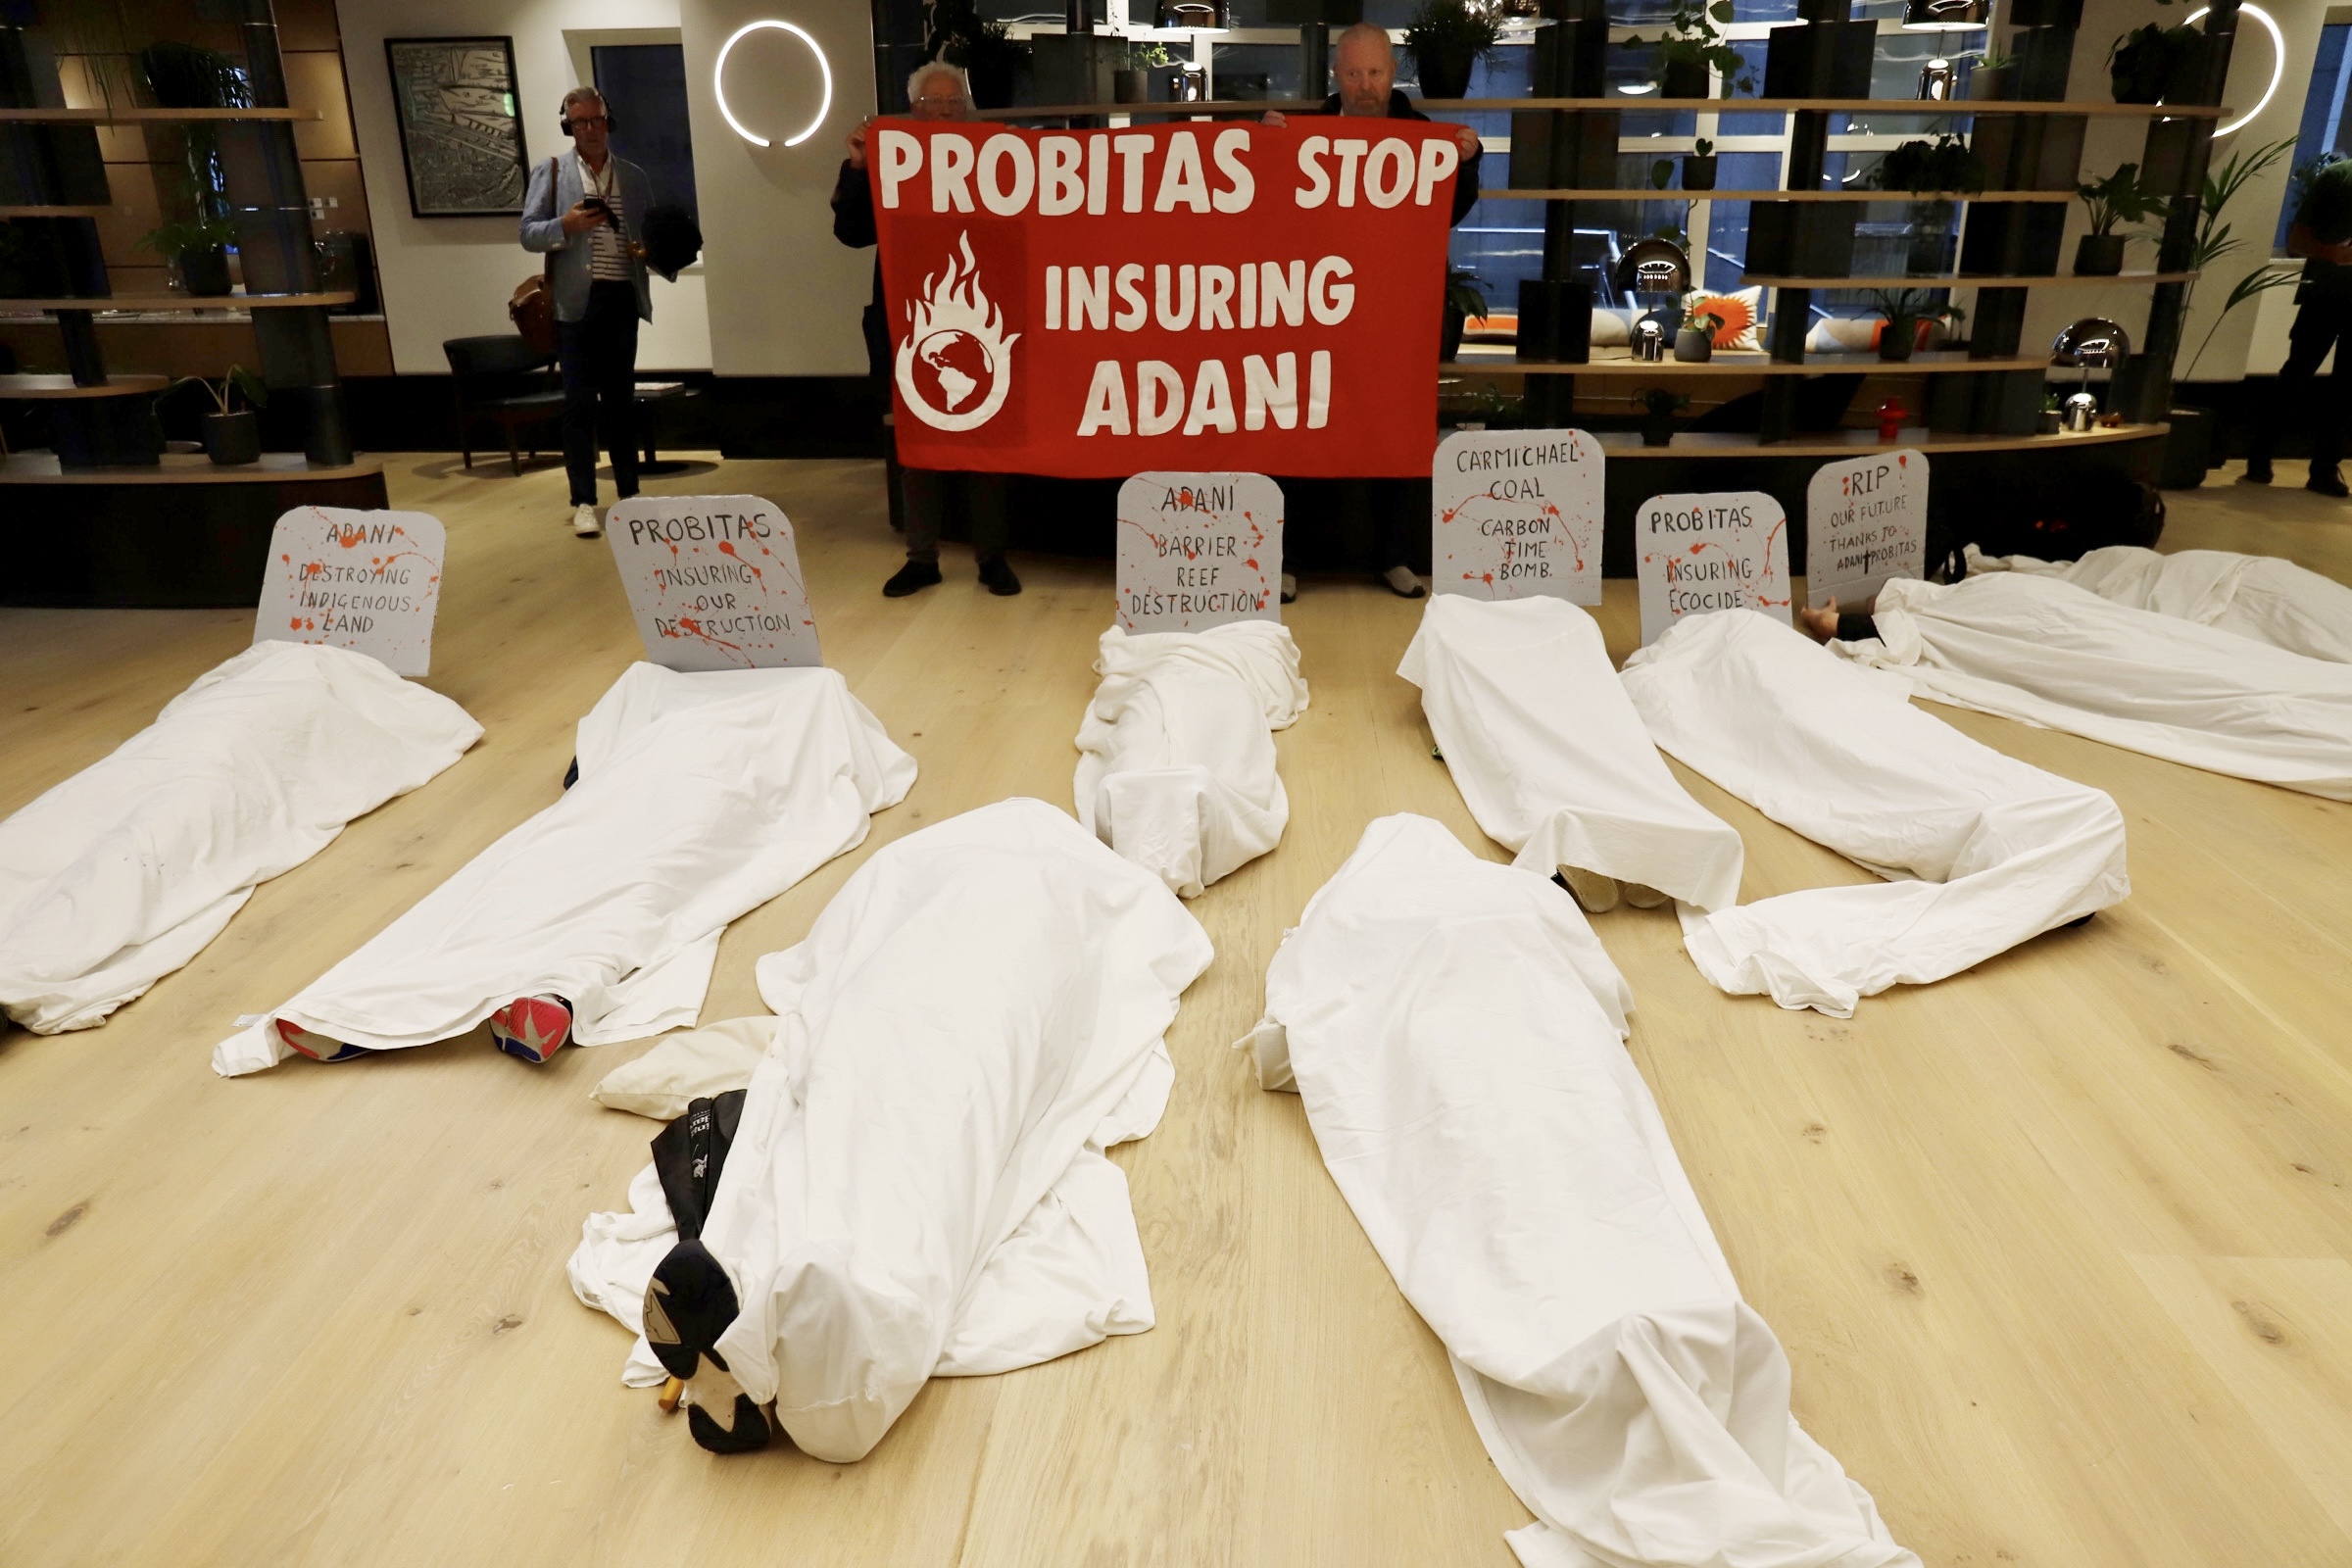 Bodies lay on the floor covered in white sheets for the "die in" action. People stand behind with a red sign that says "Probitas Stop Insuring Adani"